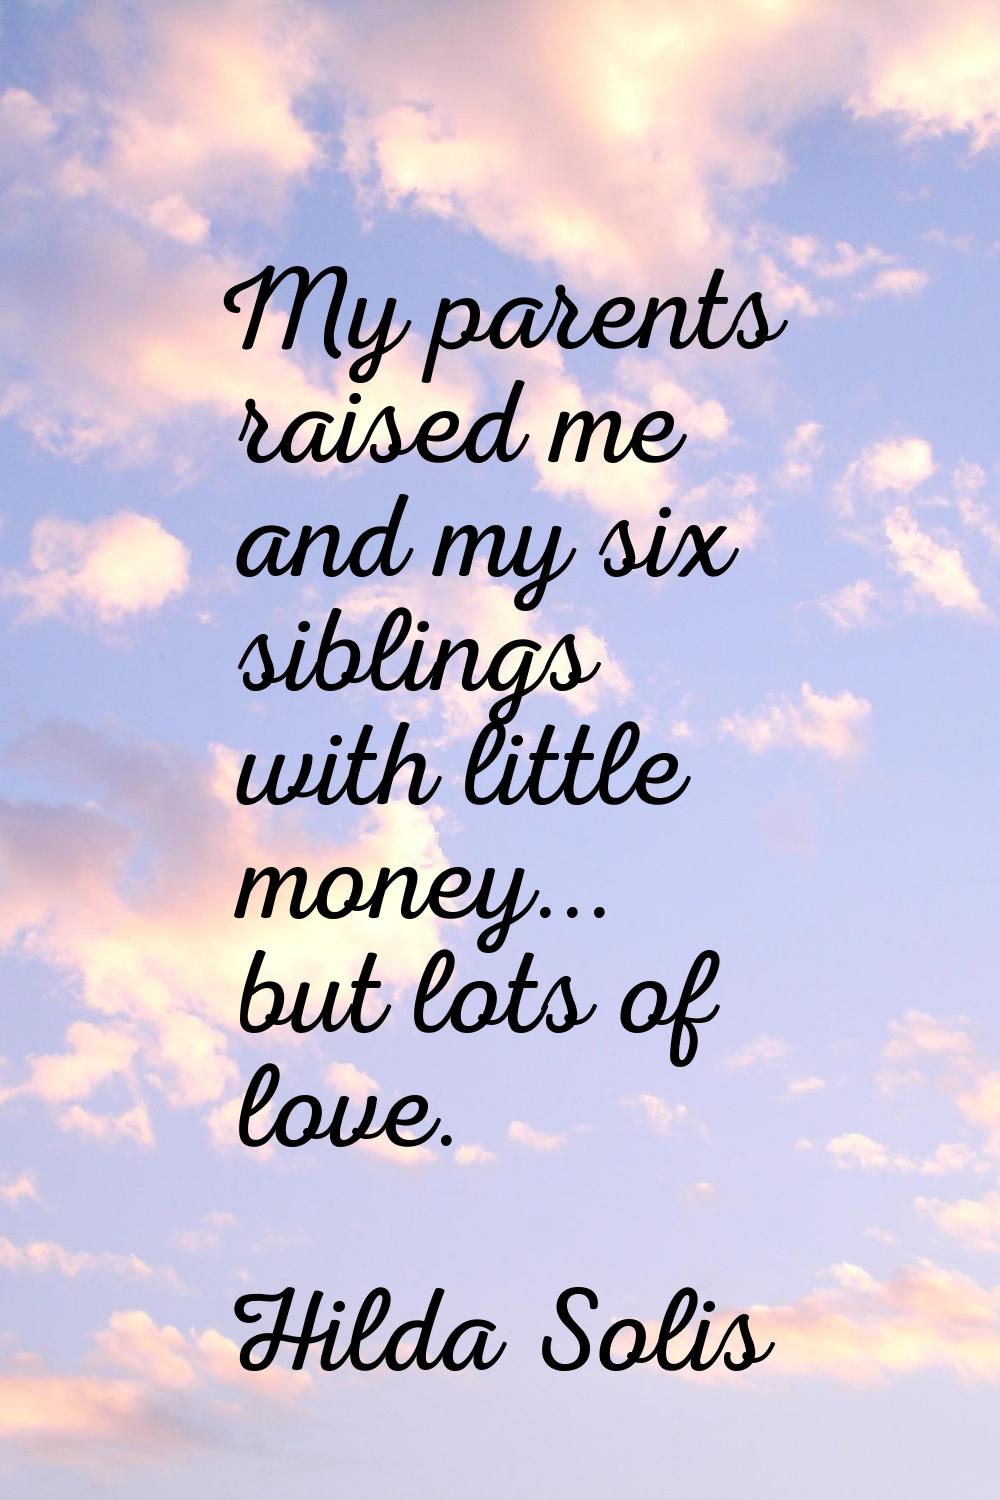 My parents raised me and my six siblings with little money... but lots of love.